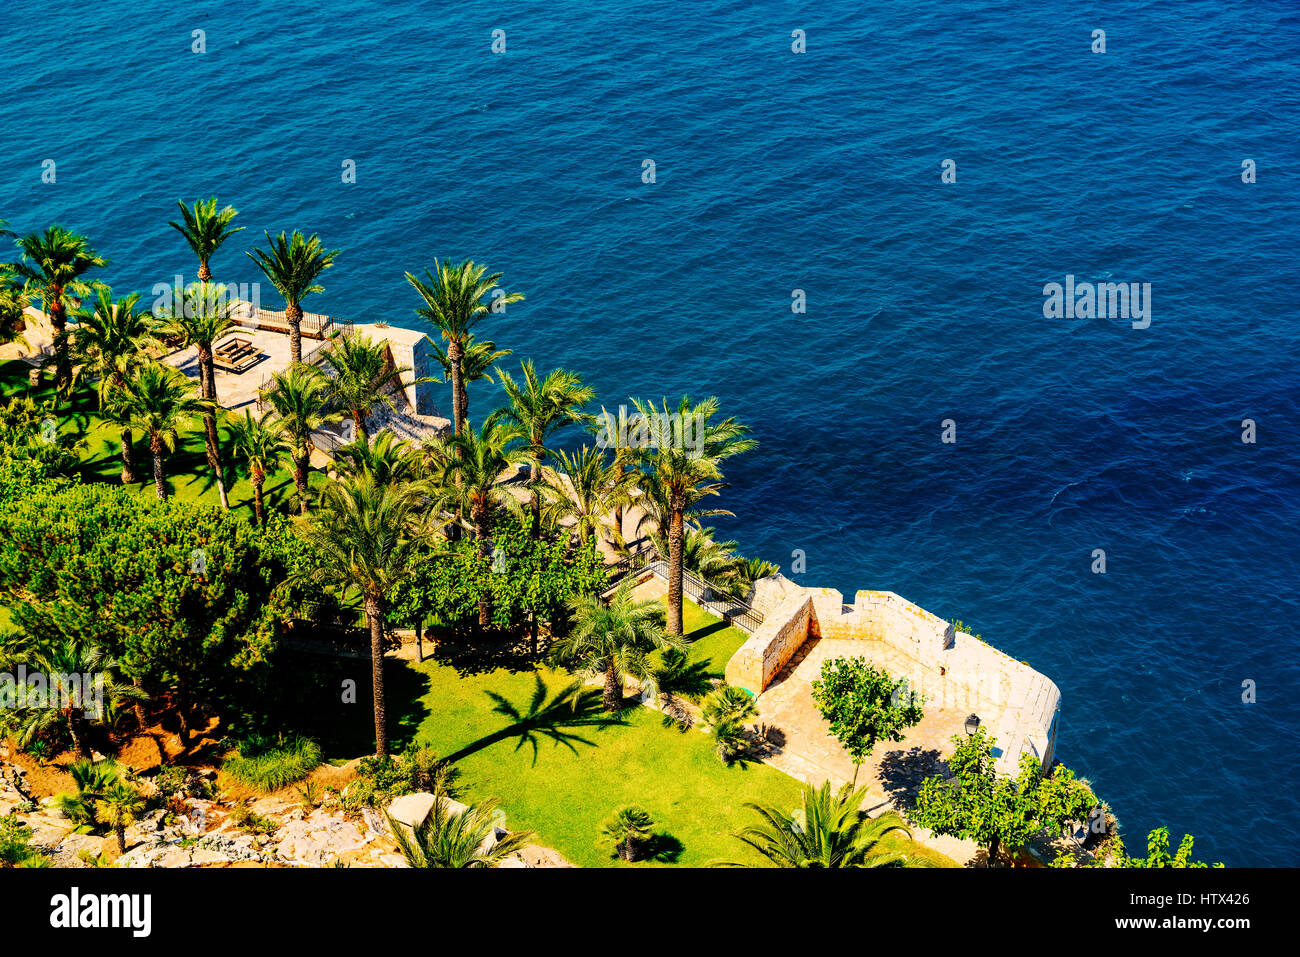 Aerial View Of Green Palm Trees And Blue Ocean Landscape Stock Photo